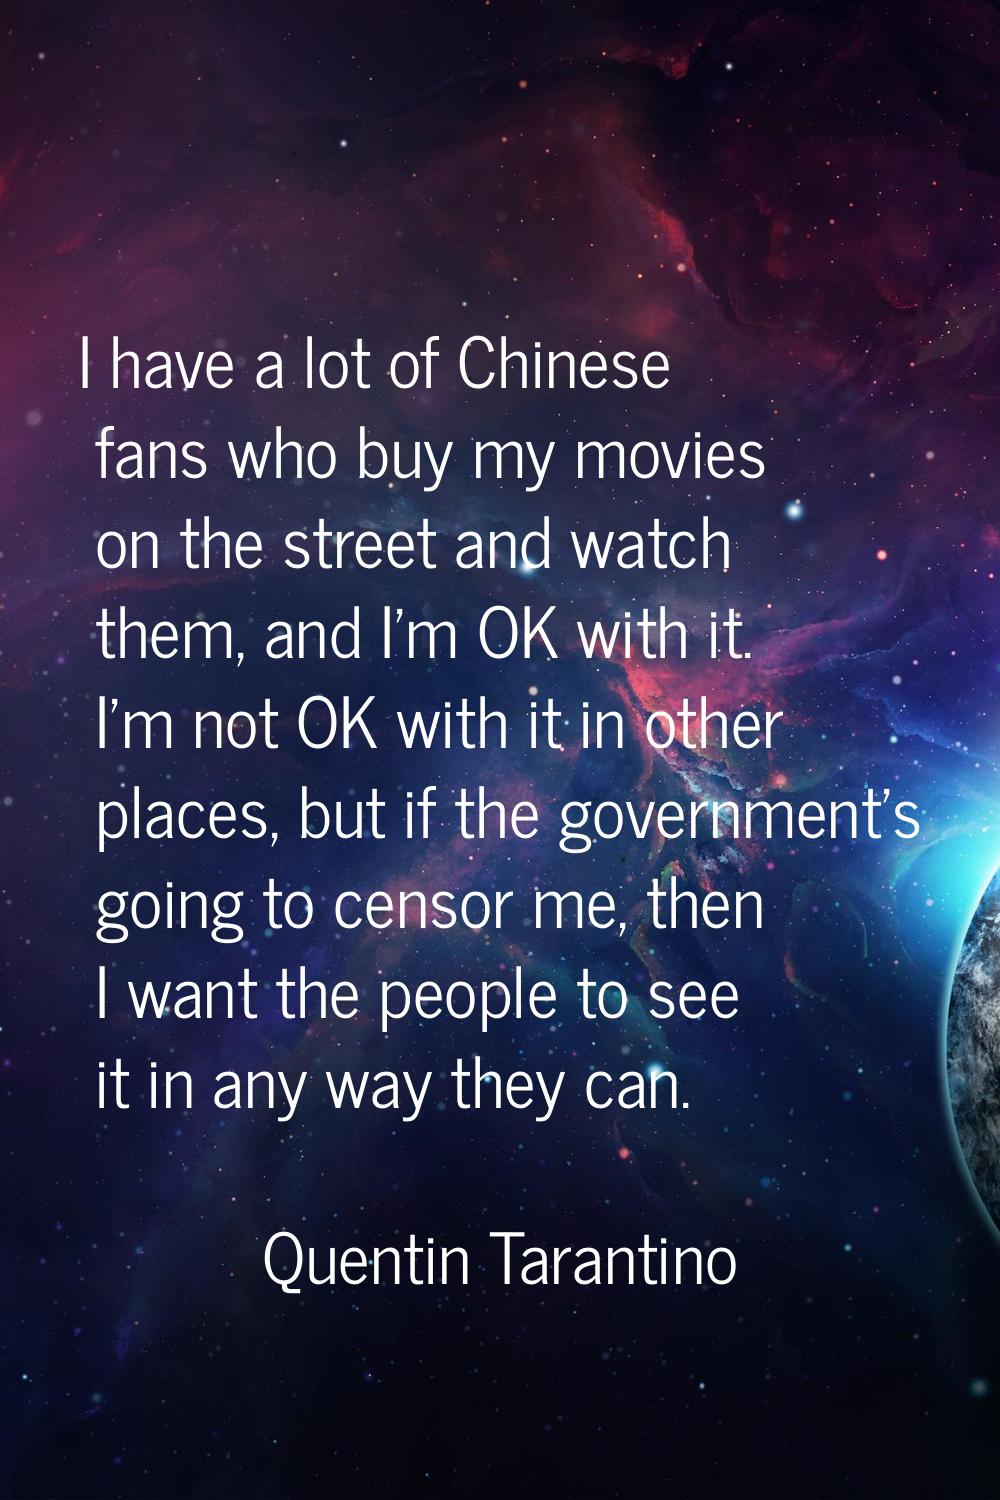 I have a lot of Chinese fans who buy my movies on the street and watch them, and I'm OK with it. I'